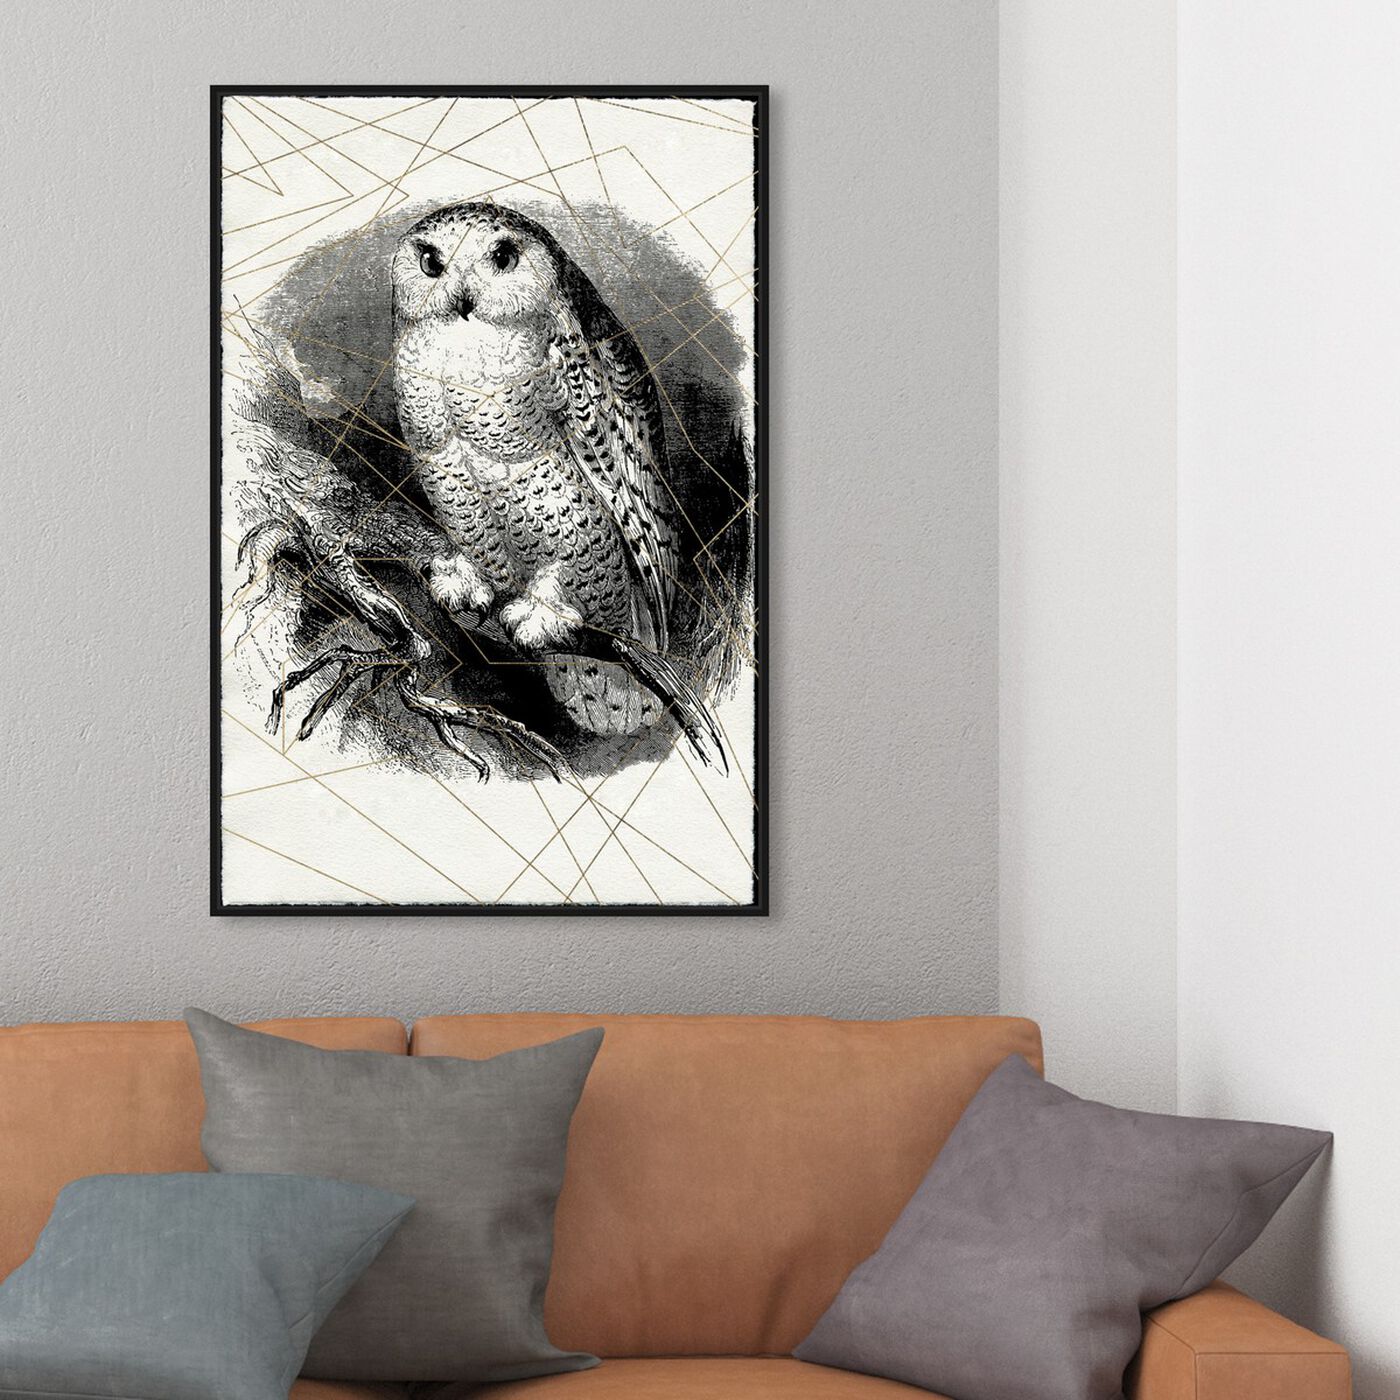 Hanging view of Owl Print featuring animals and birds art.